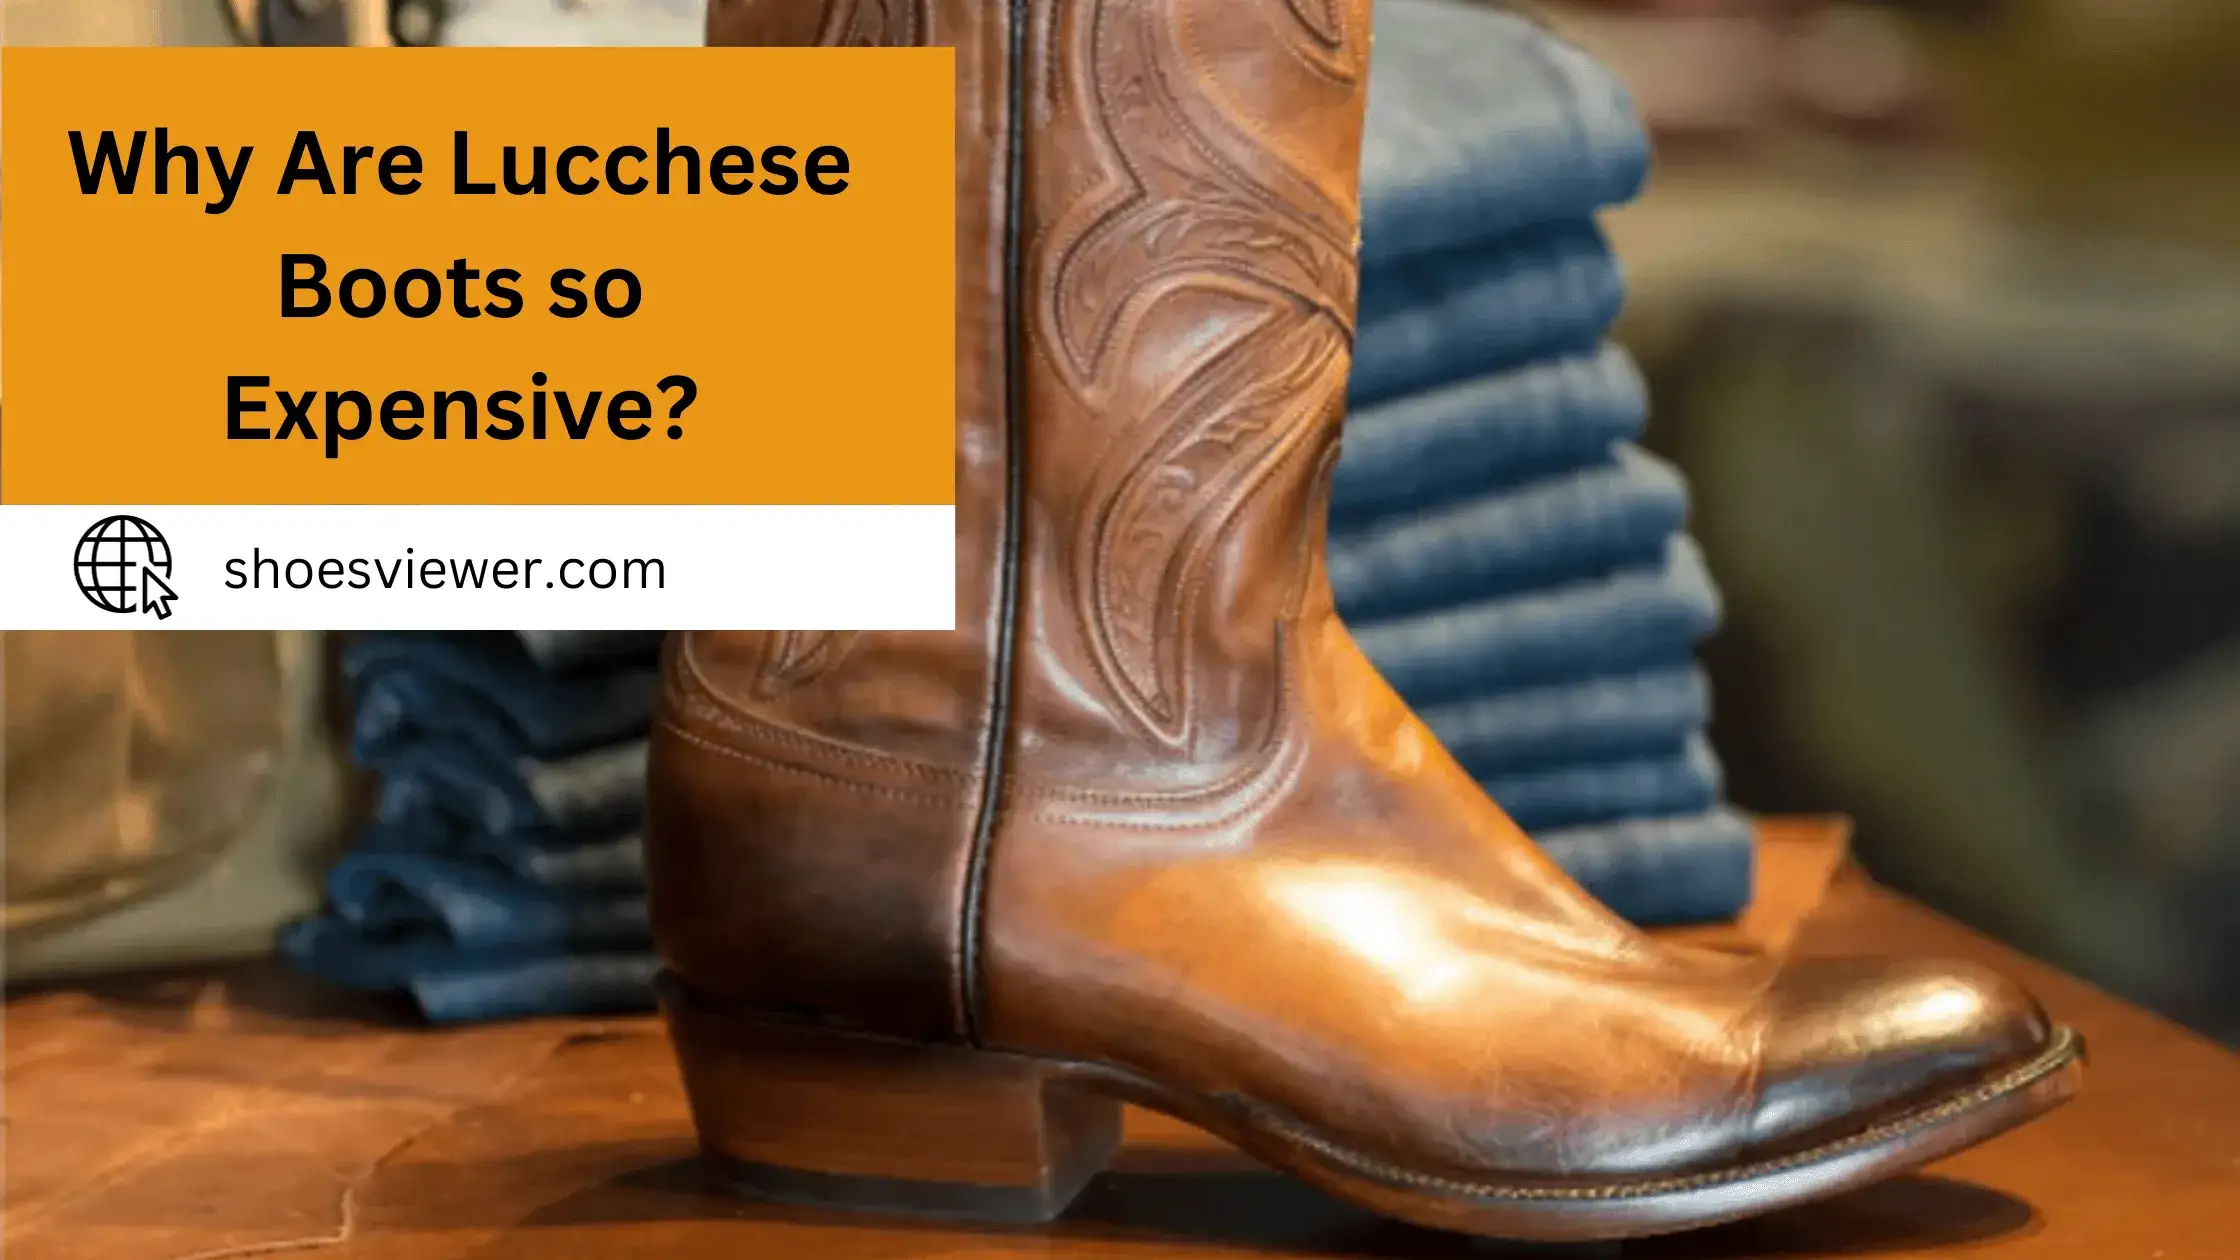 Why Are Lucchese Boots So Expensive? Detailed Information